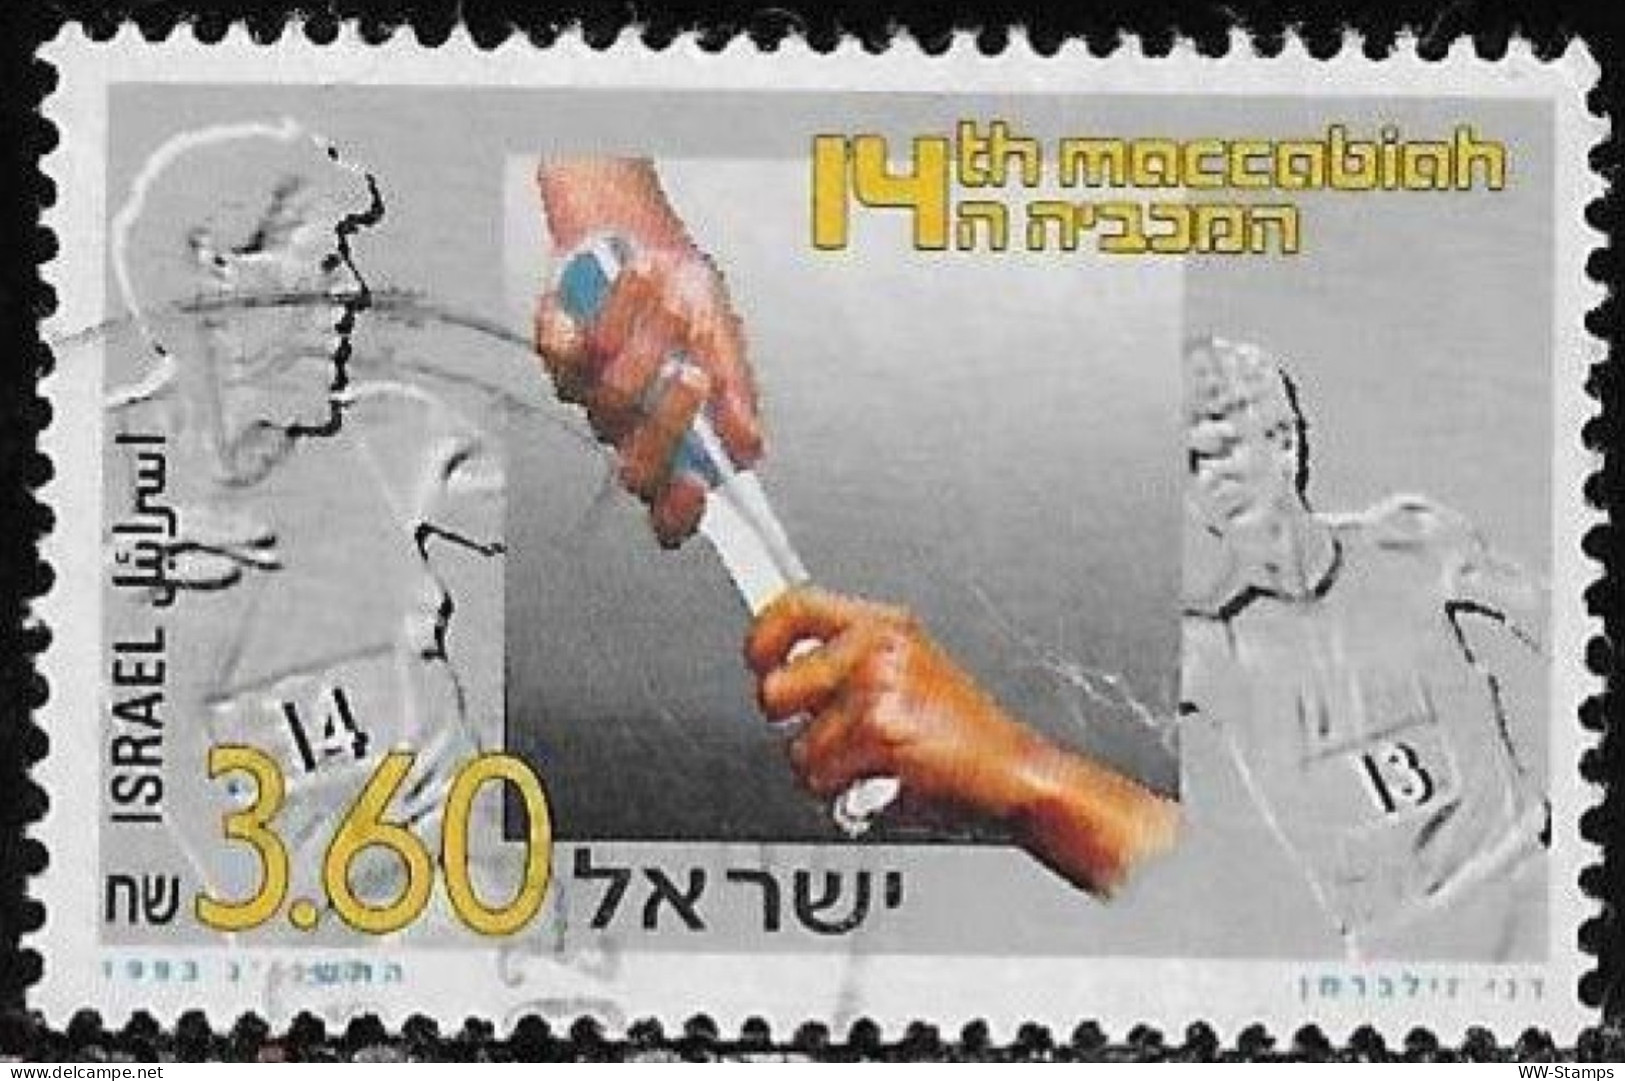 Israel 1993 Used Stamp The 14th Maccabiah Sports Games [INLT10] - Used Stamps (without Tabs)